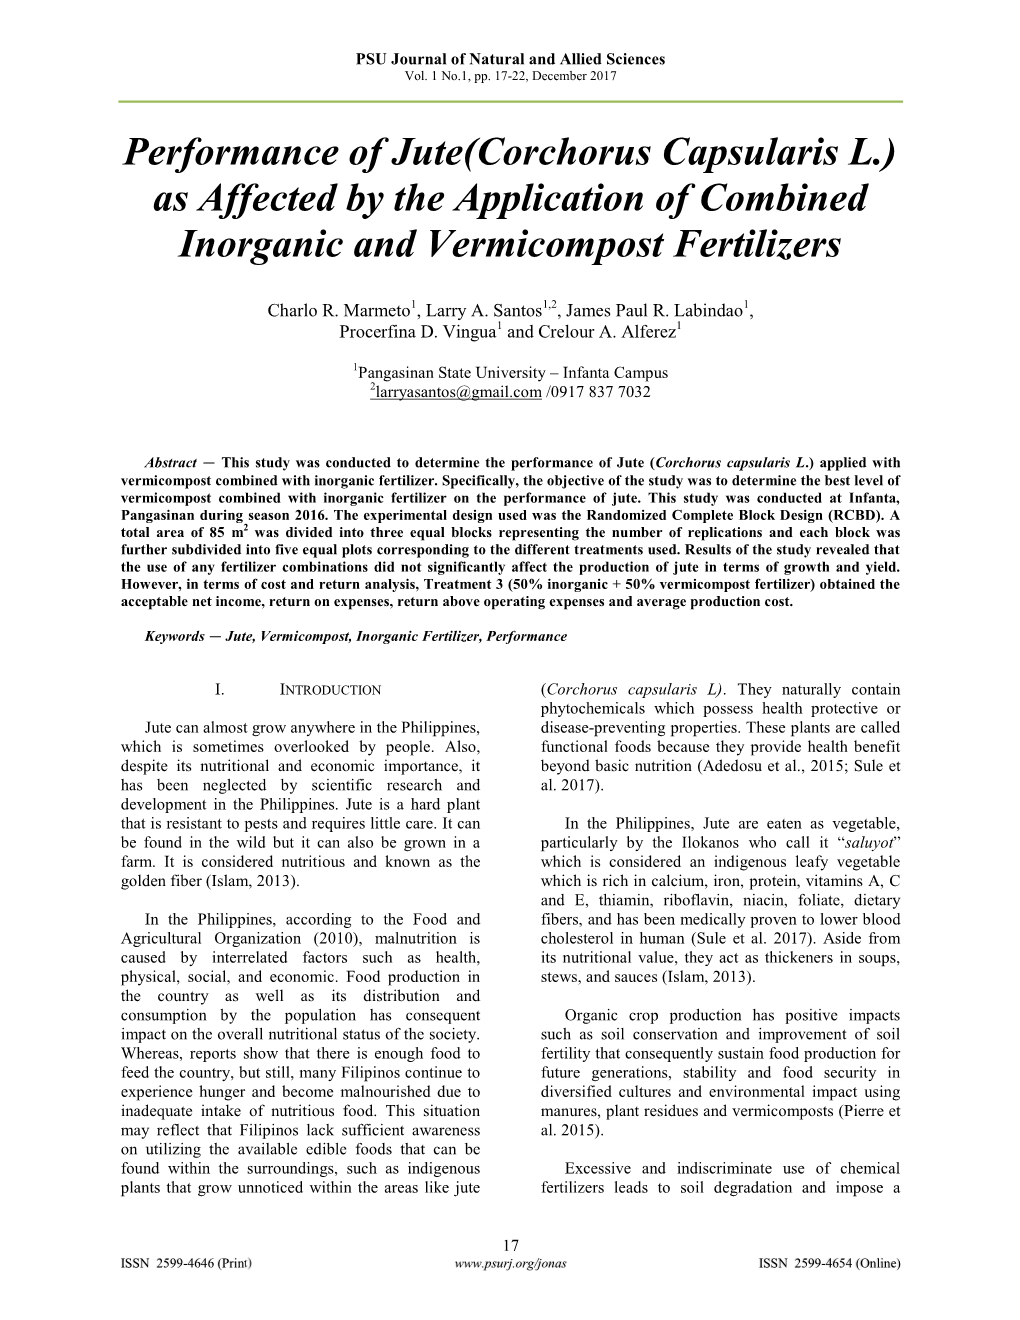 Performance of Jute(Corchorus Capsularis L.) As Affected by the Application of Combined Inorganic and Vermicompost Fertilizers